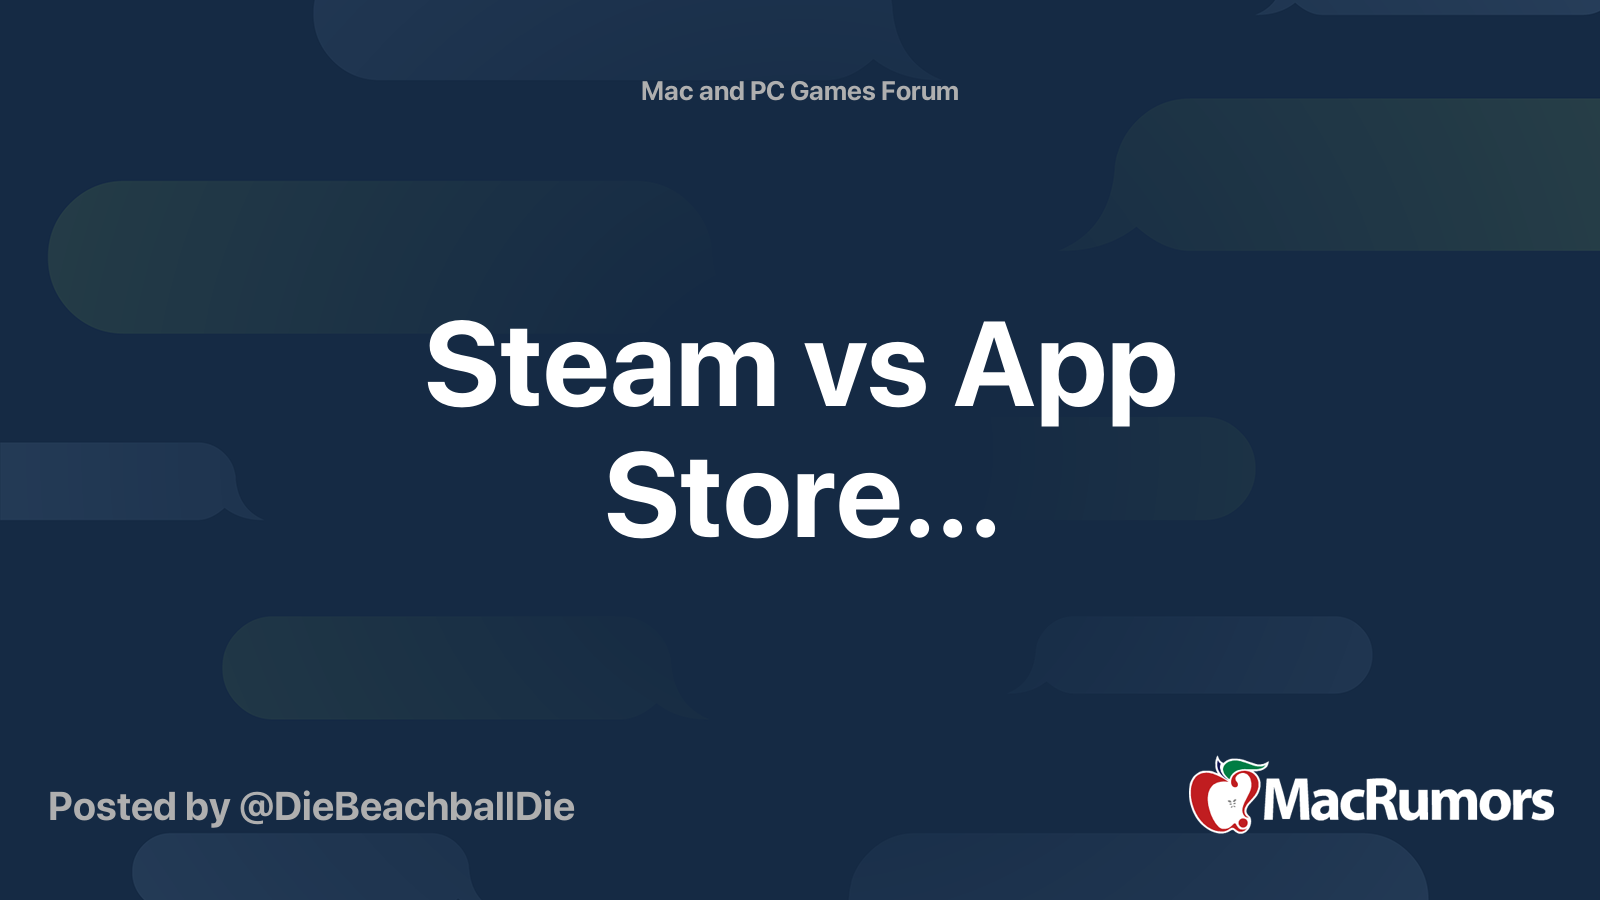 Steam is turning into the App Store and that's OK